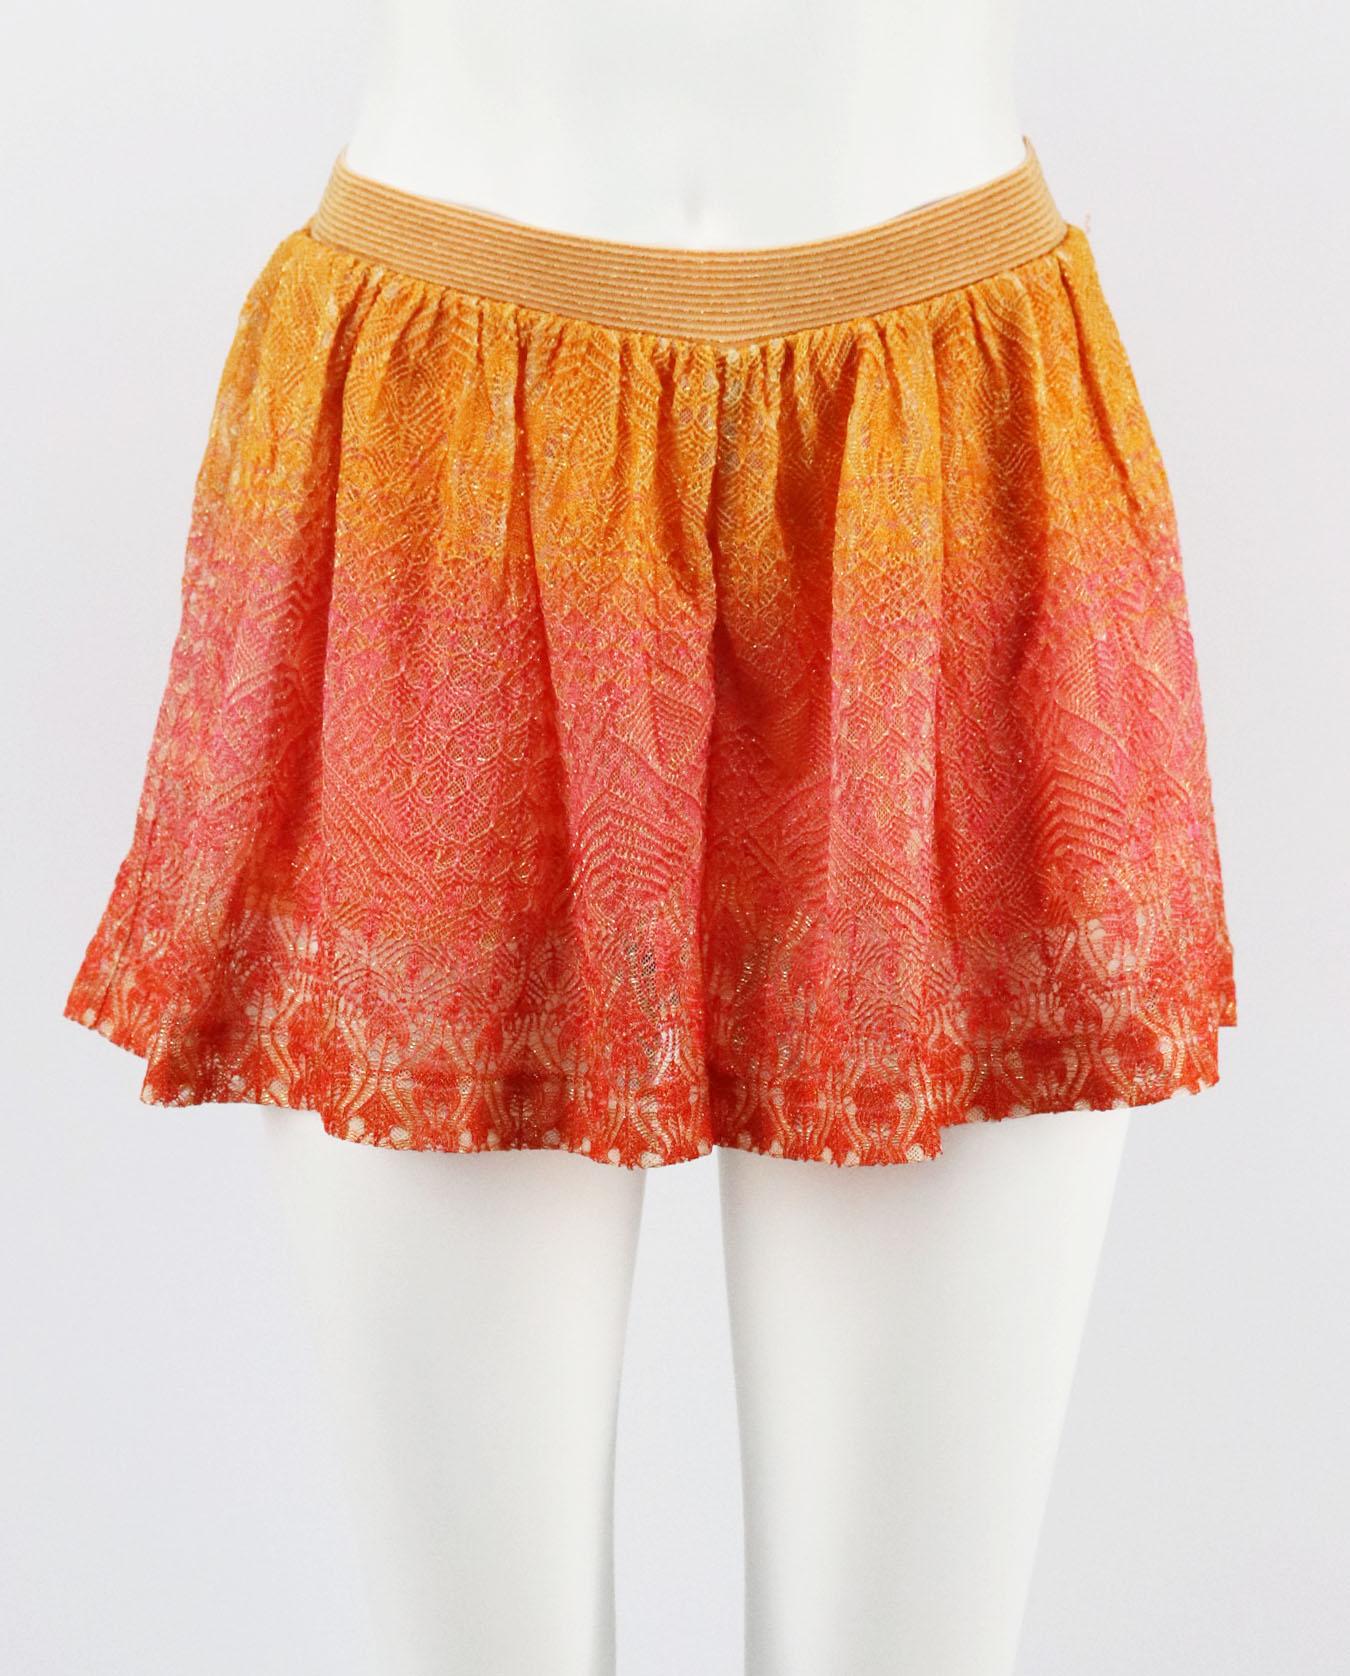 These shorts by Missoni have been expertly crochet-knitted in Italy from kaleidoscopic yarns and fitted with an elasticated waistband for a flexible fit.
Tonal-orange crochet-knit.
Pull on.
87% Rayon, 8% polyester, 5% polyamide; lining: 100%